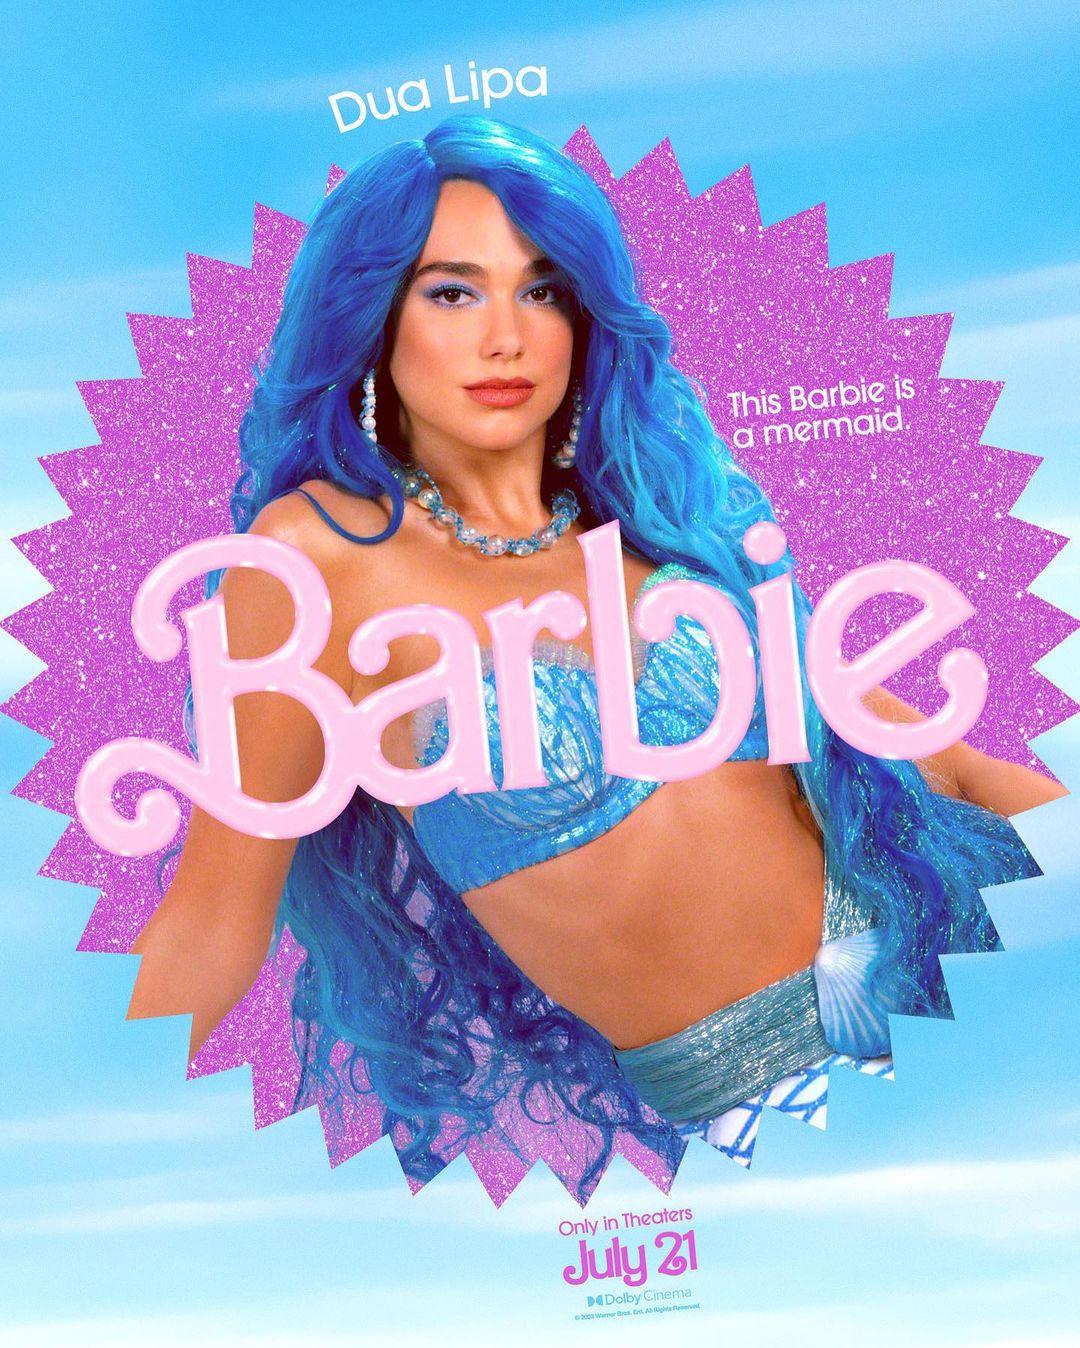 Dua Lipa Stuns As A Mermaid For Her Acting Debut In The Upcoming 'Barbie' Movie